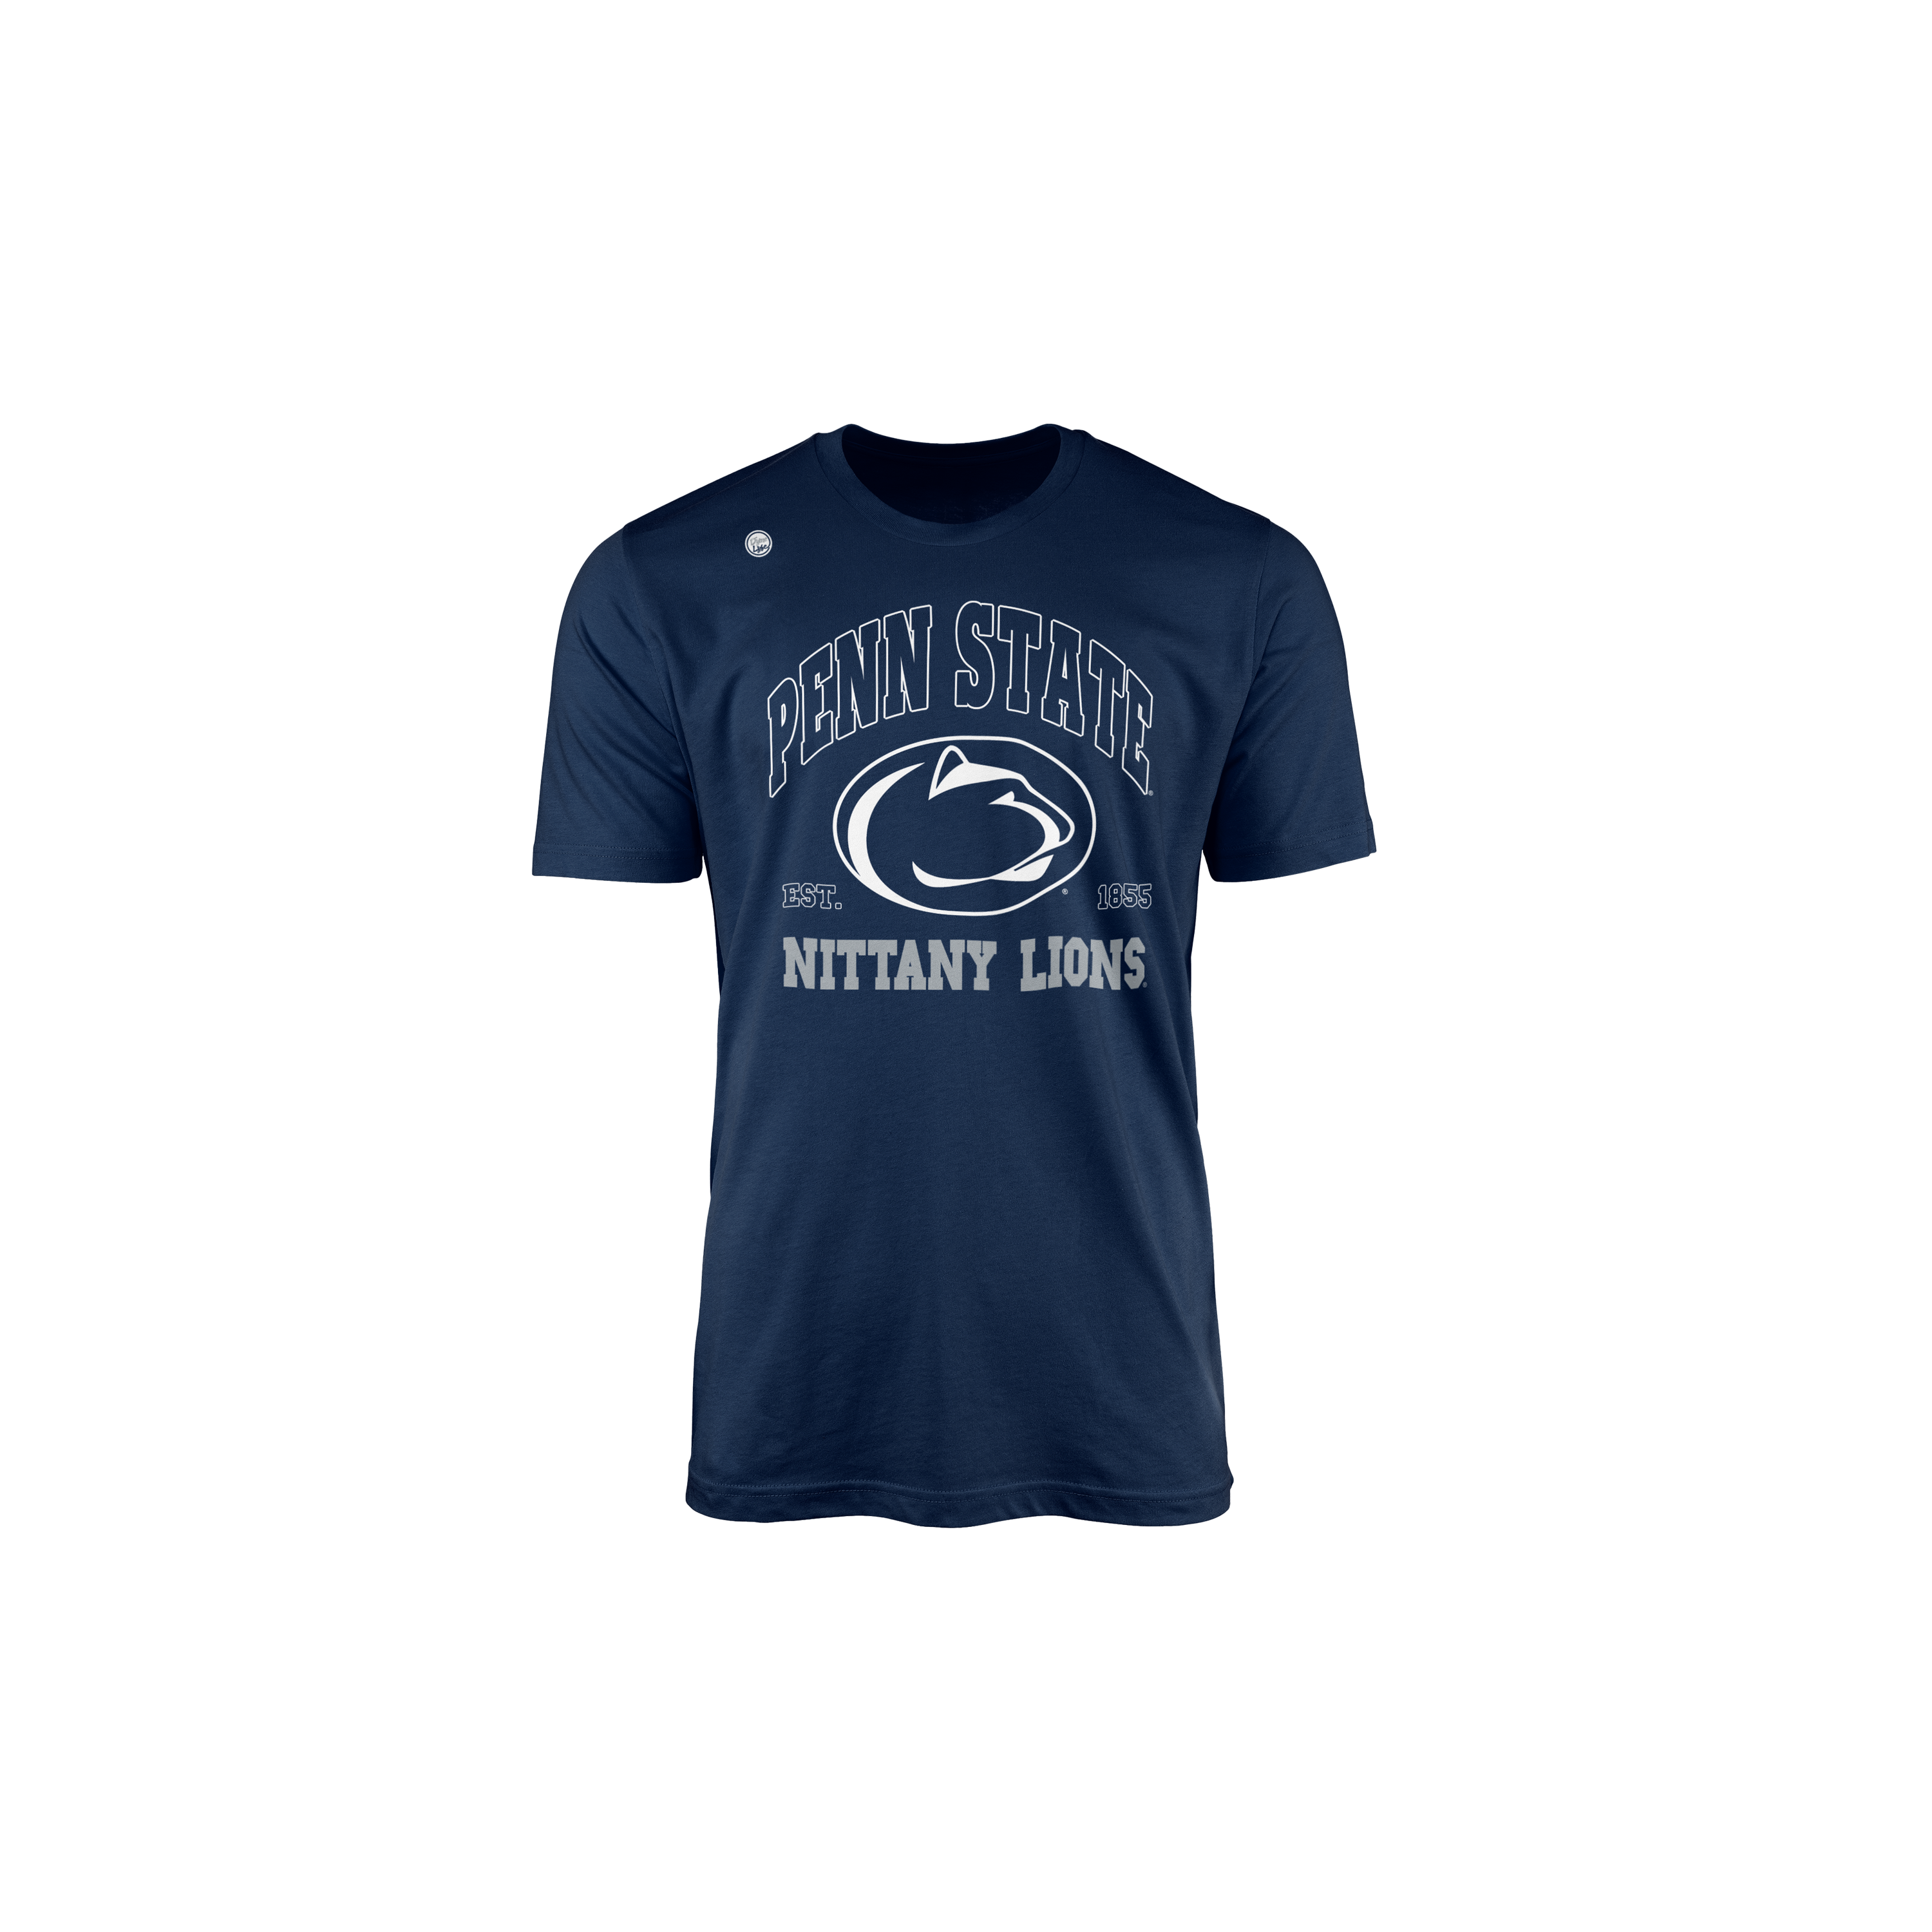 Penn State Nittany Lions Youth Est. Tee